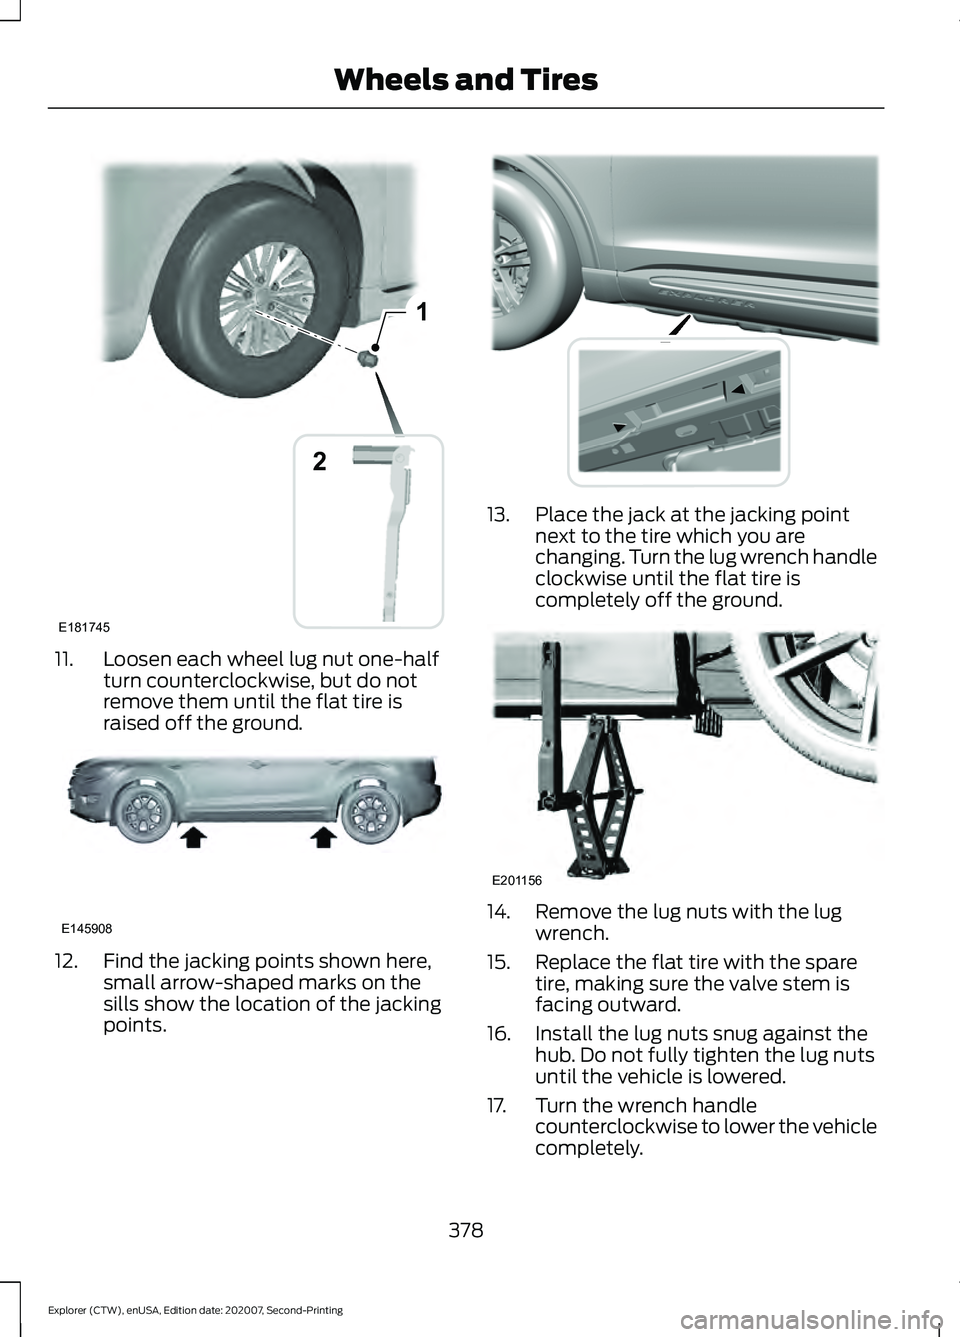 FORD EXPLORER 2021  Owners Manual 11. Loosen each wheel lug nut one-half
turn counterclockwise, but do not
remove them until the flat tire is
raised off the ground.12. Find the jacking points shown here,
small arrow-shaped marks on th